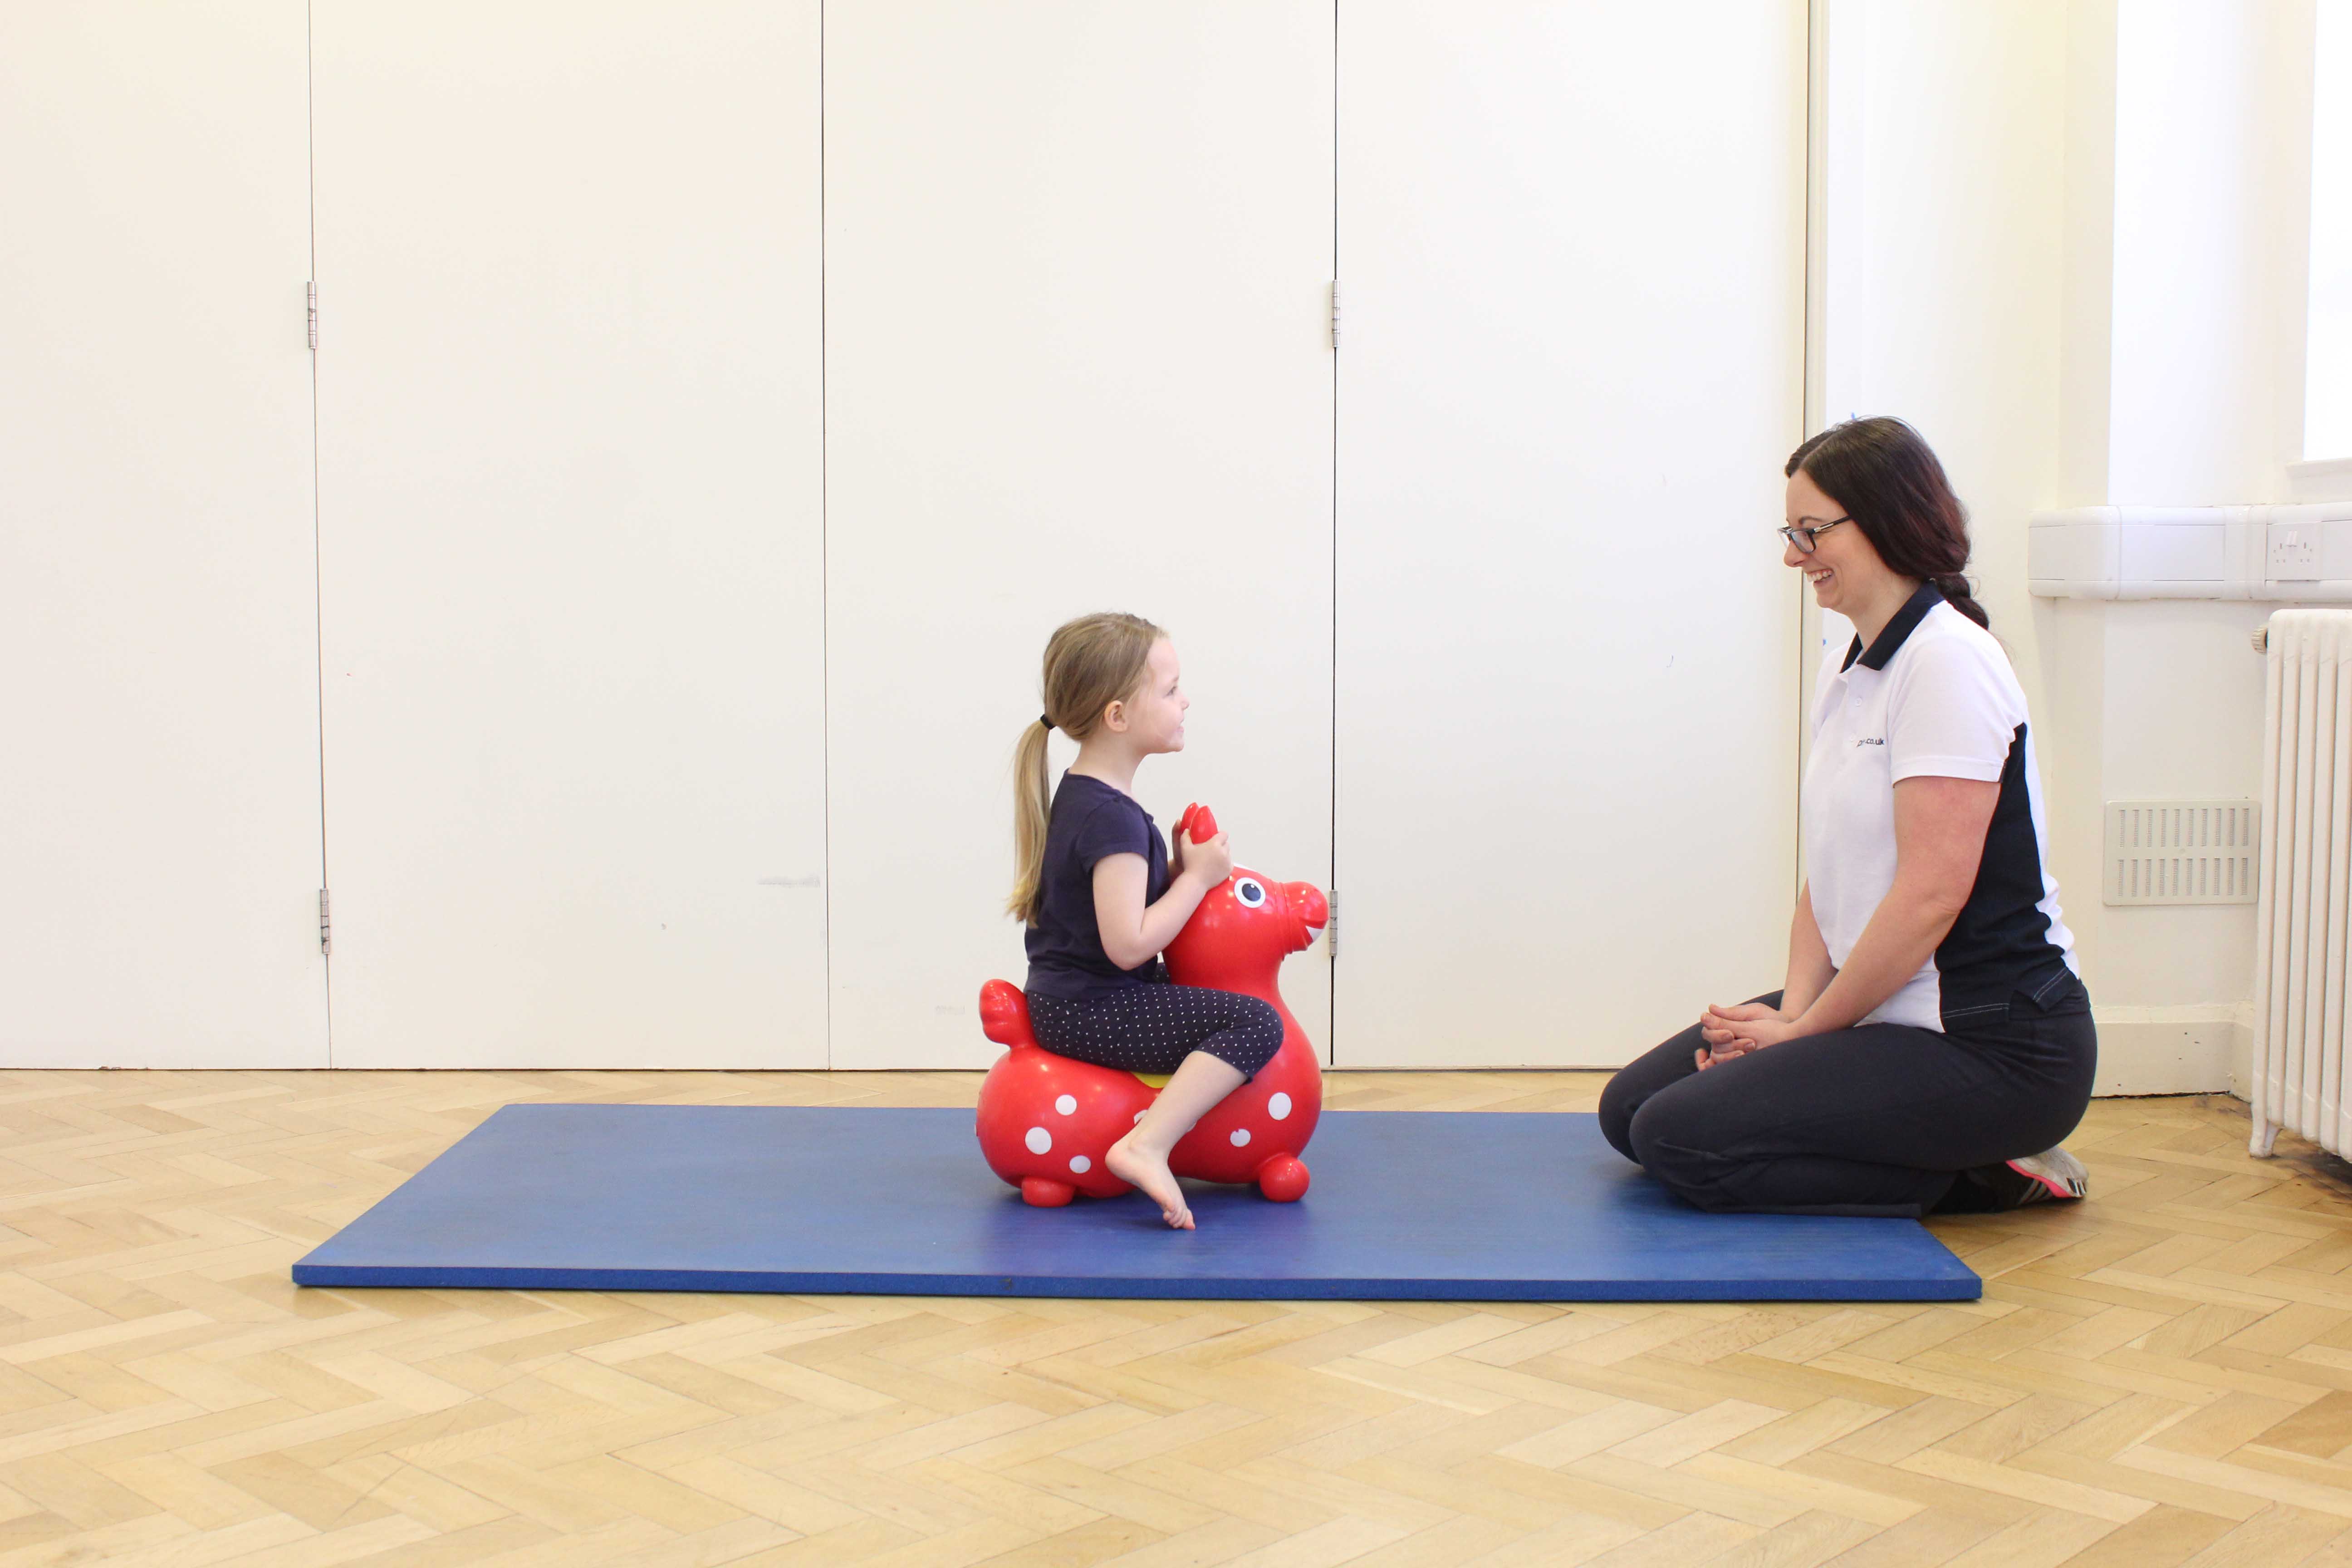 Paediatric physiotherapist promoting functional ability through play activities